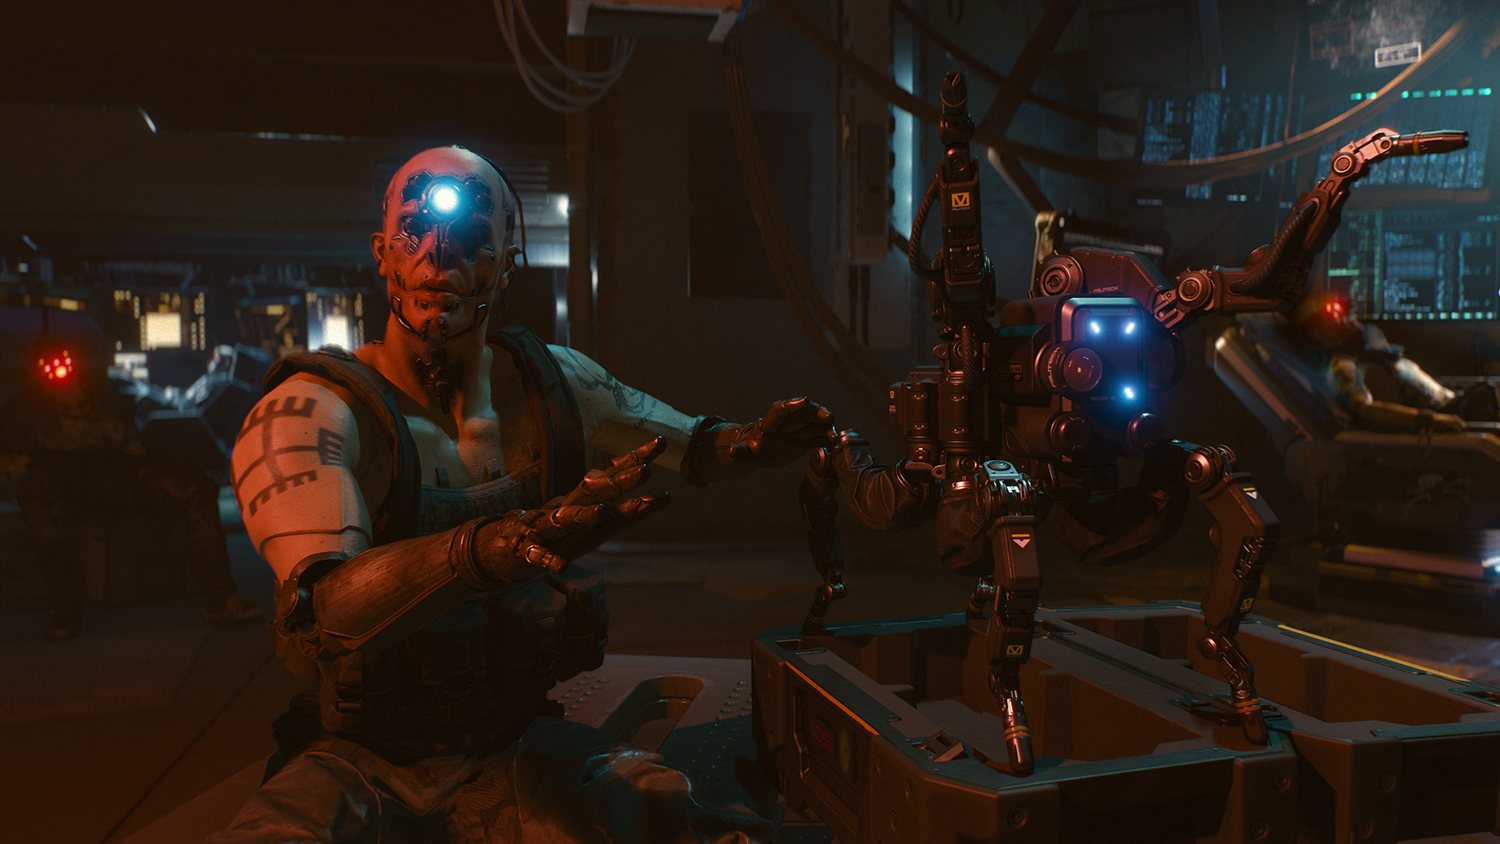 A Cyberpunk 2077 character looks at the camera with a light on his forehead.